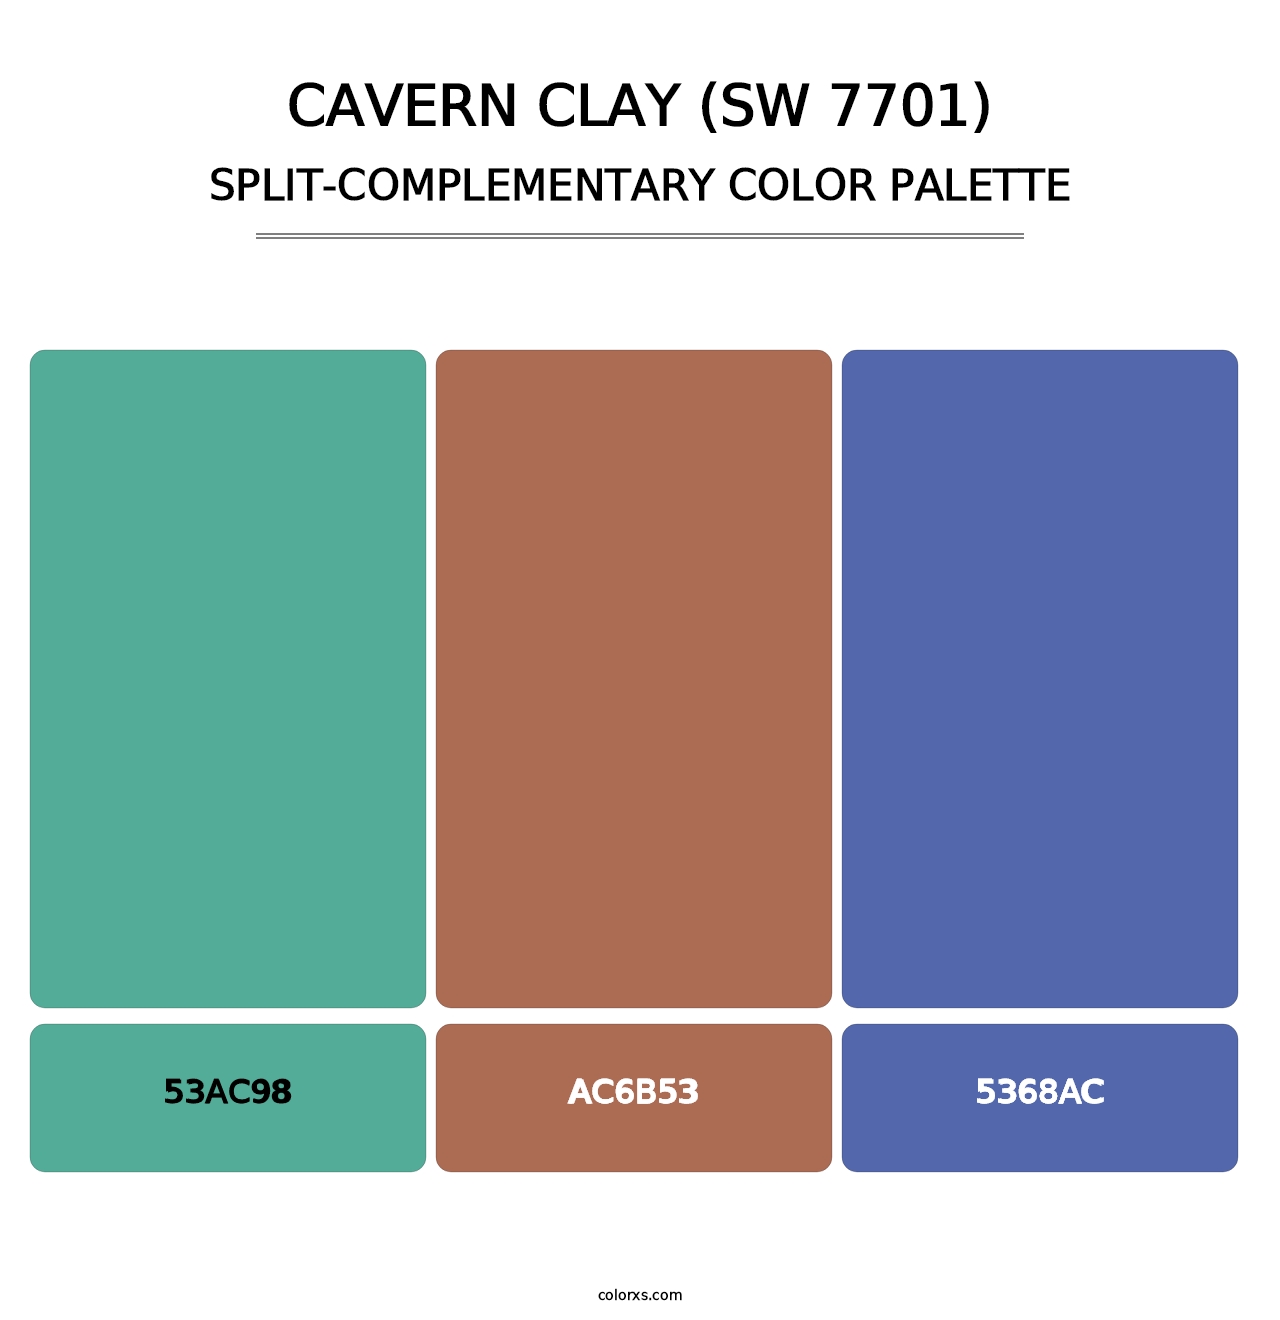 Cavern Clay (SW 7701) - Split-Complementary Color Palette